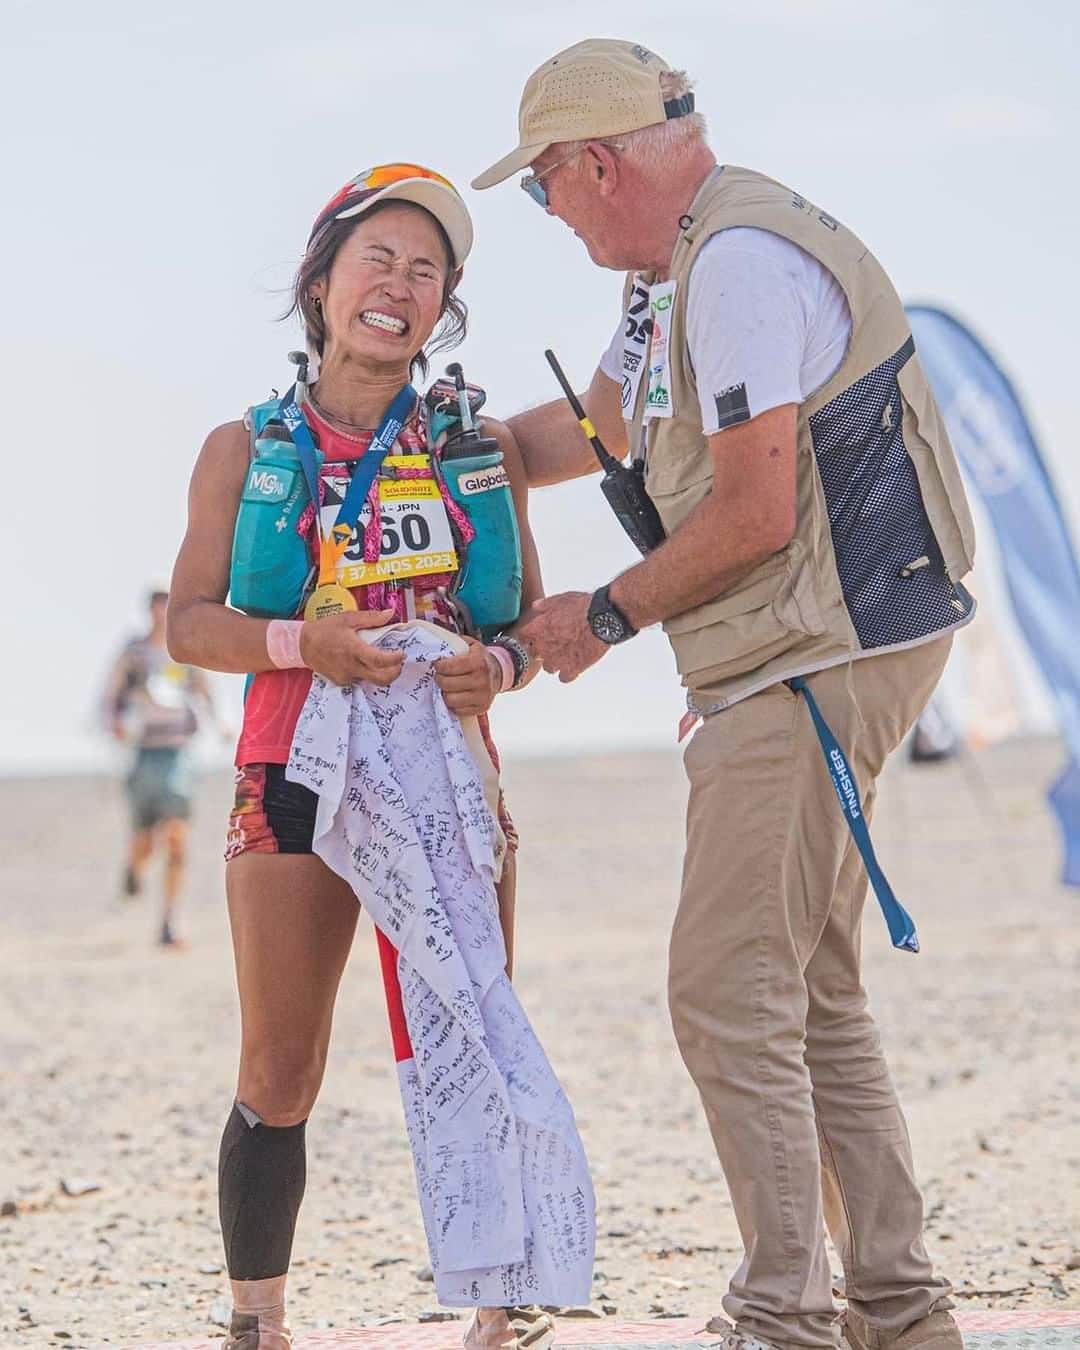 TOMOMIさんのインスタグラム写真 - (TOMOMIInstagram)「Marathon Des Sables🏜 Women 3rd🥉(Over all 19th🏅) ⌚️29:39:51  Thank you very much for your support😭🙏✨  I was definitely stronger than last time.  I couldn't win,  but I'll get stronger and get revenge.  I would be happy if you could continue to support me🙇‍♀️  Thank you so much ✨ I love everyone🥹🫶🏾❤  ┈┈┈┈┈┈┈┈┈┈┈┈┈┈┈┈┈┈┈┈ 取り急ぎ🙇‍♀️ 本当にたくさんの応援ありがとうございました！  たくさん応援パワーや温かいメッセージのおかげで 前回よりも確実に強くなれました。  優勝という位置にはまだまだ届かなかったけど もっと強くなって必ずリベンジします。  今後は海外のステージレースを中心に 走力、持久力、忍耐力を強化します！  そして必ずMDSで優勝して世界一になります。  引き続き応援してもらえたら嬉しいです。  本当にたくさんの応援心の底からありがとうございました😭✨  みんな大好きです🥹🫶🏾❤️  Special support🤝 @spot_llc  @narurebo  @orehasesshusu  @phiten_official   #athlete #running #marathon #trail #trailrunning #mountain #japan #runner  #尾藤朋美 #世界のBITOH #日本代表 #アスリート #ランナー #トレイルランナー #マラソン #トレイルランニング  #世の中で最も過酷なマラソン  #サハラ砂漠250kmマラソン  🏜@marathondessables with @use.repost ・・・ The French Maryline Nakache wins this fifth stage 💪🏻  Aziza El Amrany and Tomomi Bitoh follow her on the podium!  📲 Follow the race live on our website 👉🏻 Watch the finish line live 🔗 All links in the bio!  📸 @marta_bacardit_photography   #MarathonDesSables #MarathonDesSables2023 #MarathonDesSables23 #MDS」4月30日 7時40分 - tomomi_fitness